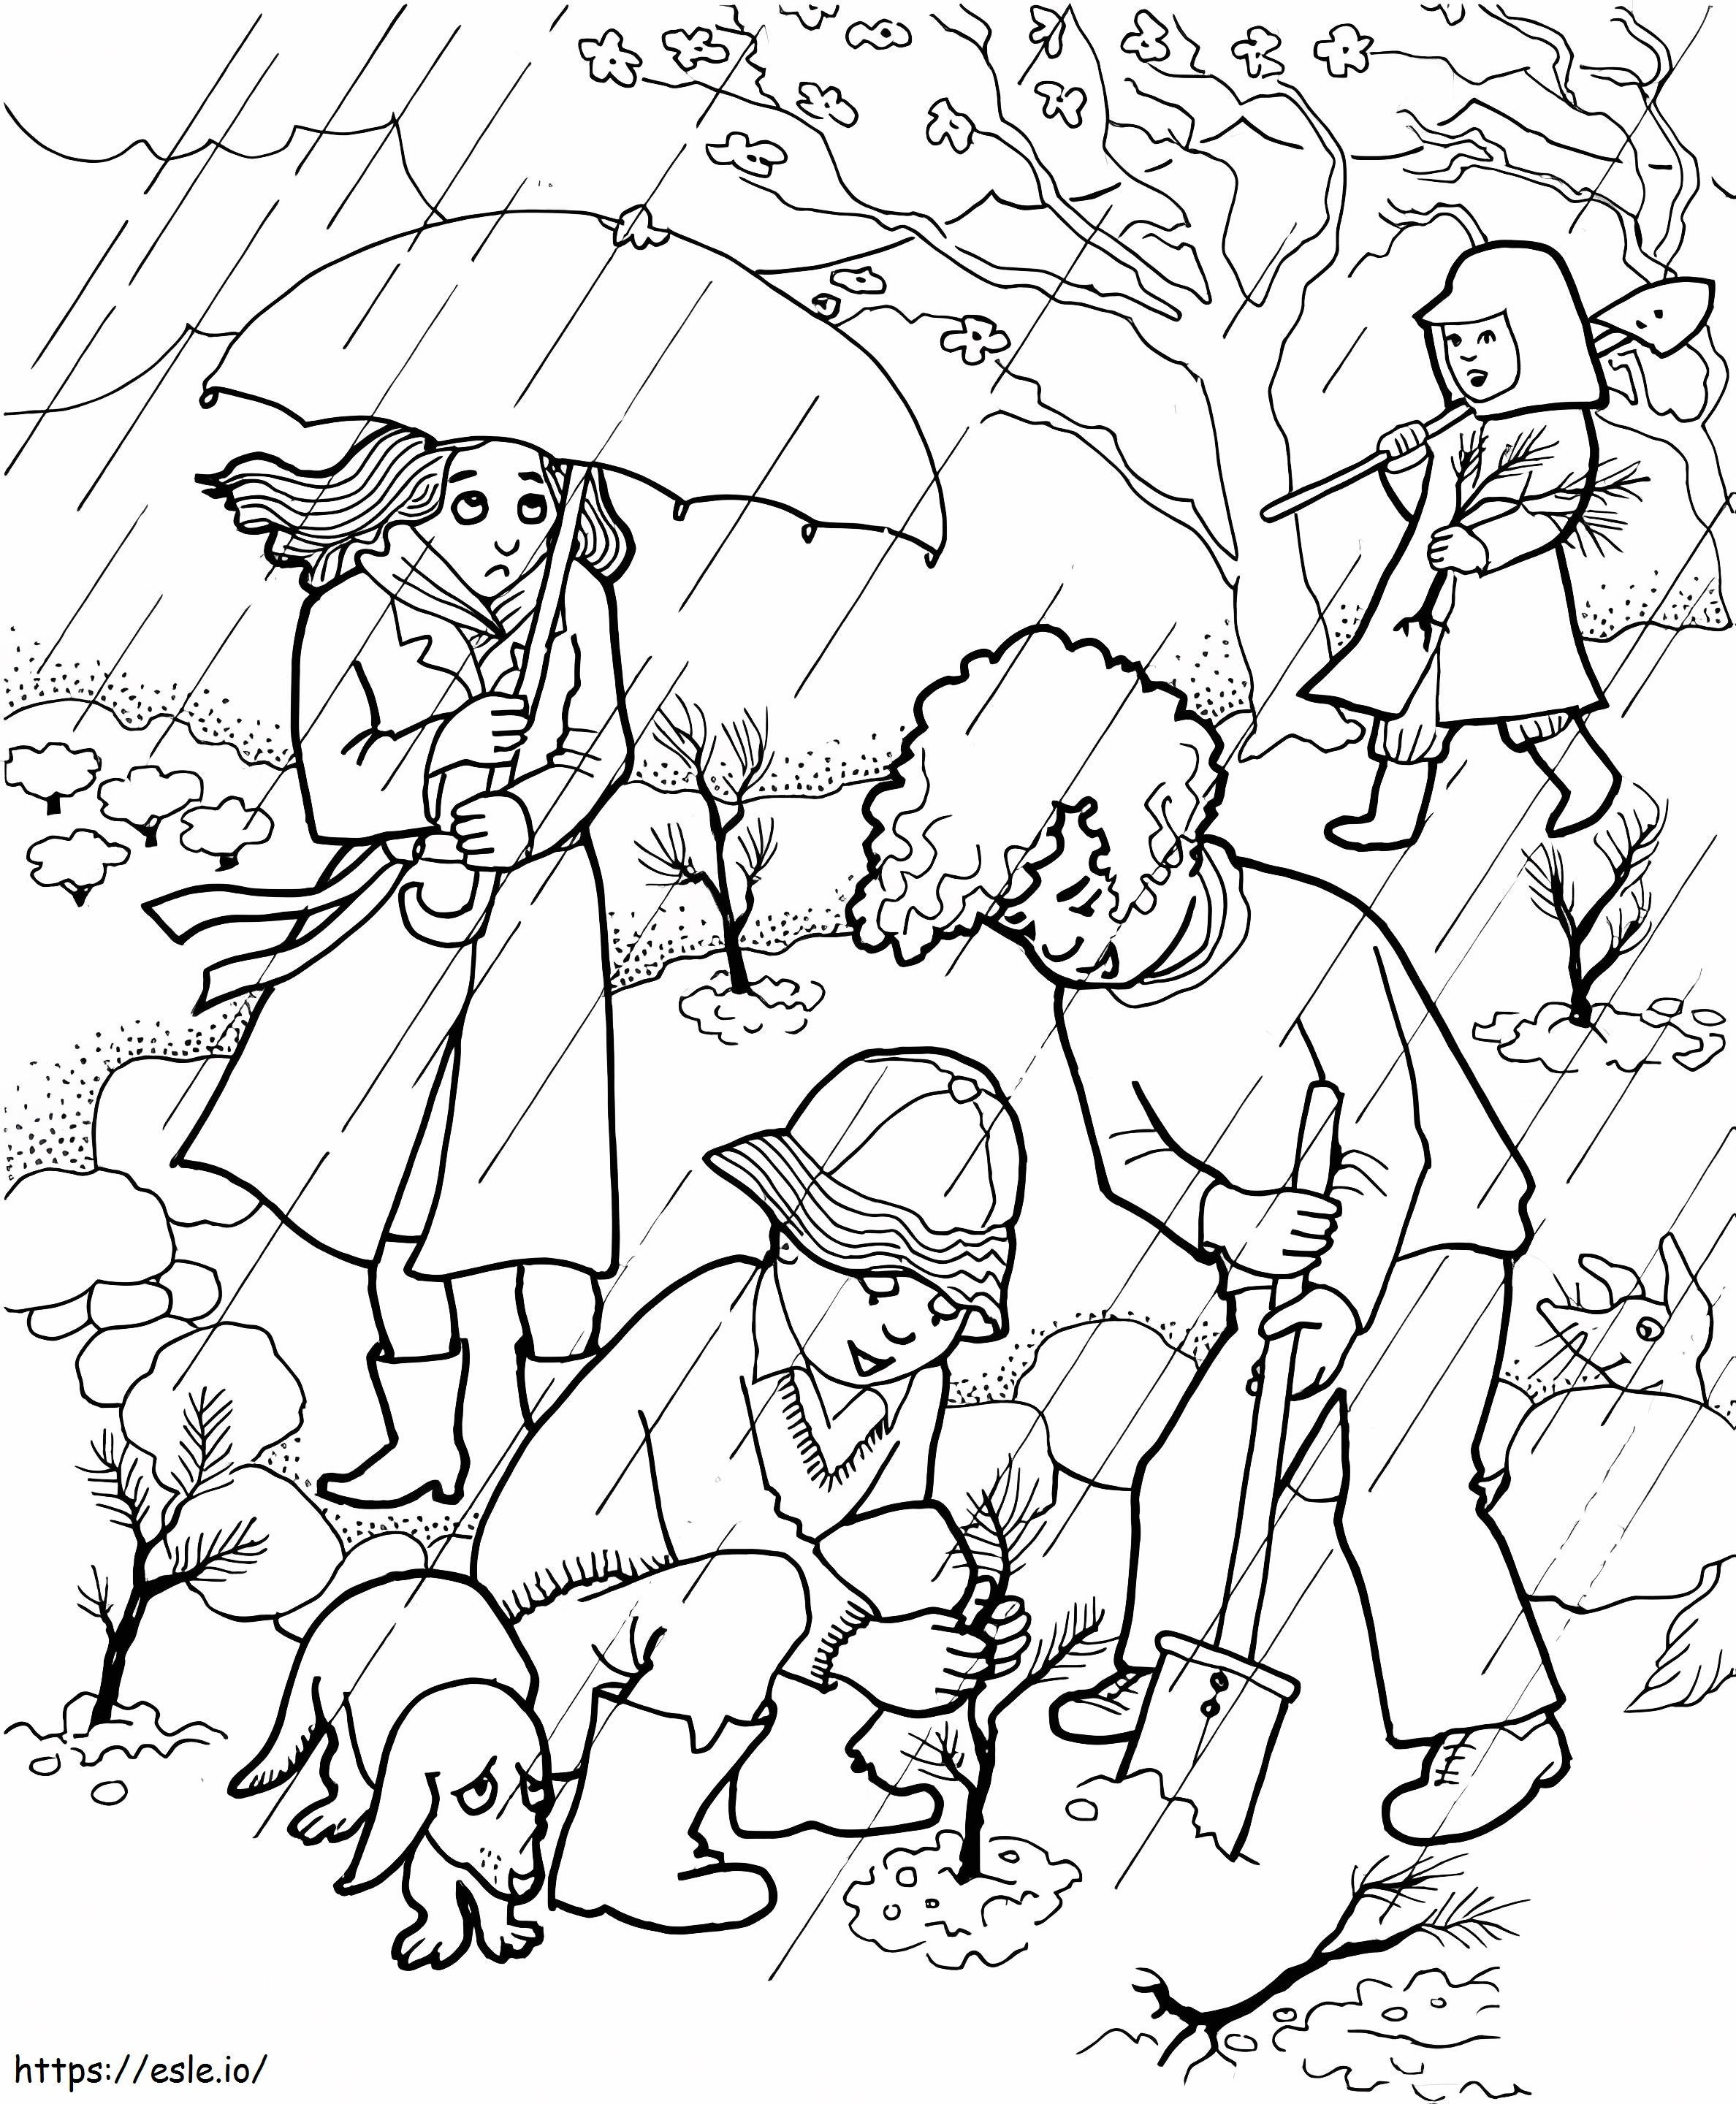 Planting A Tree coloring page